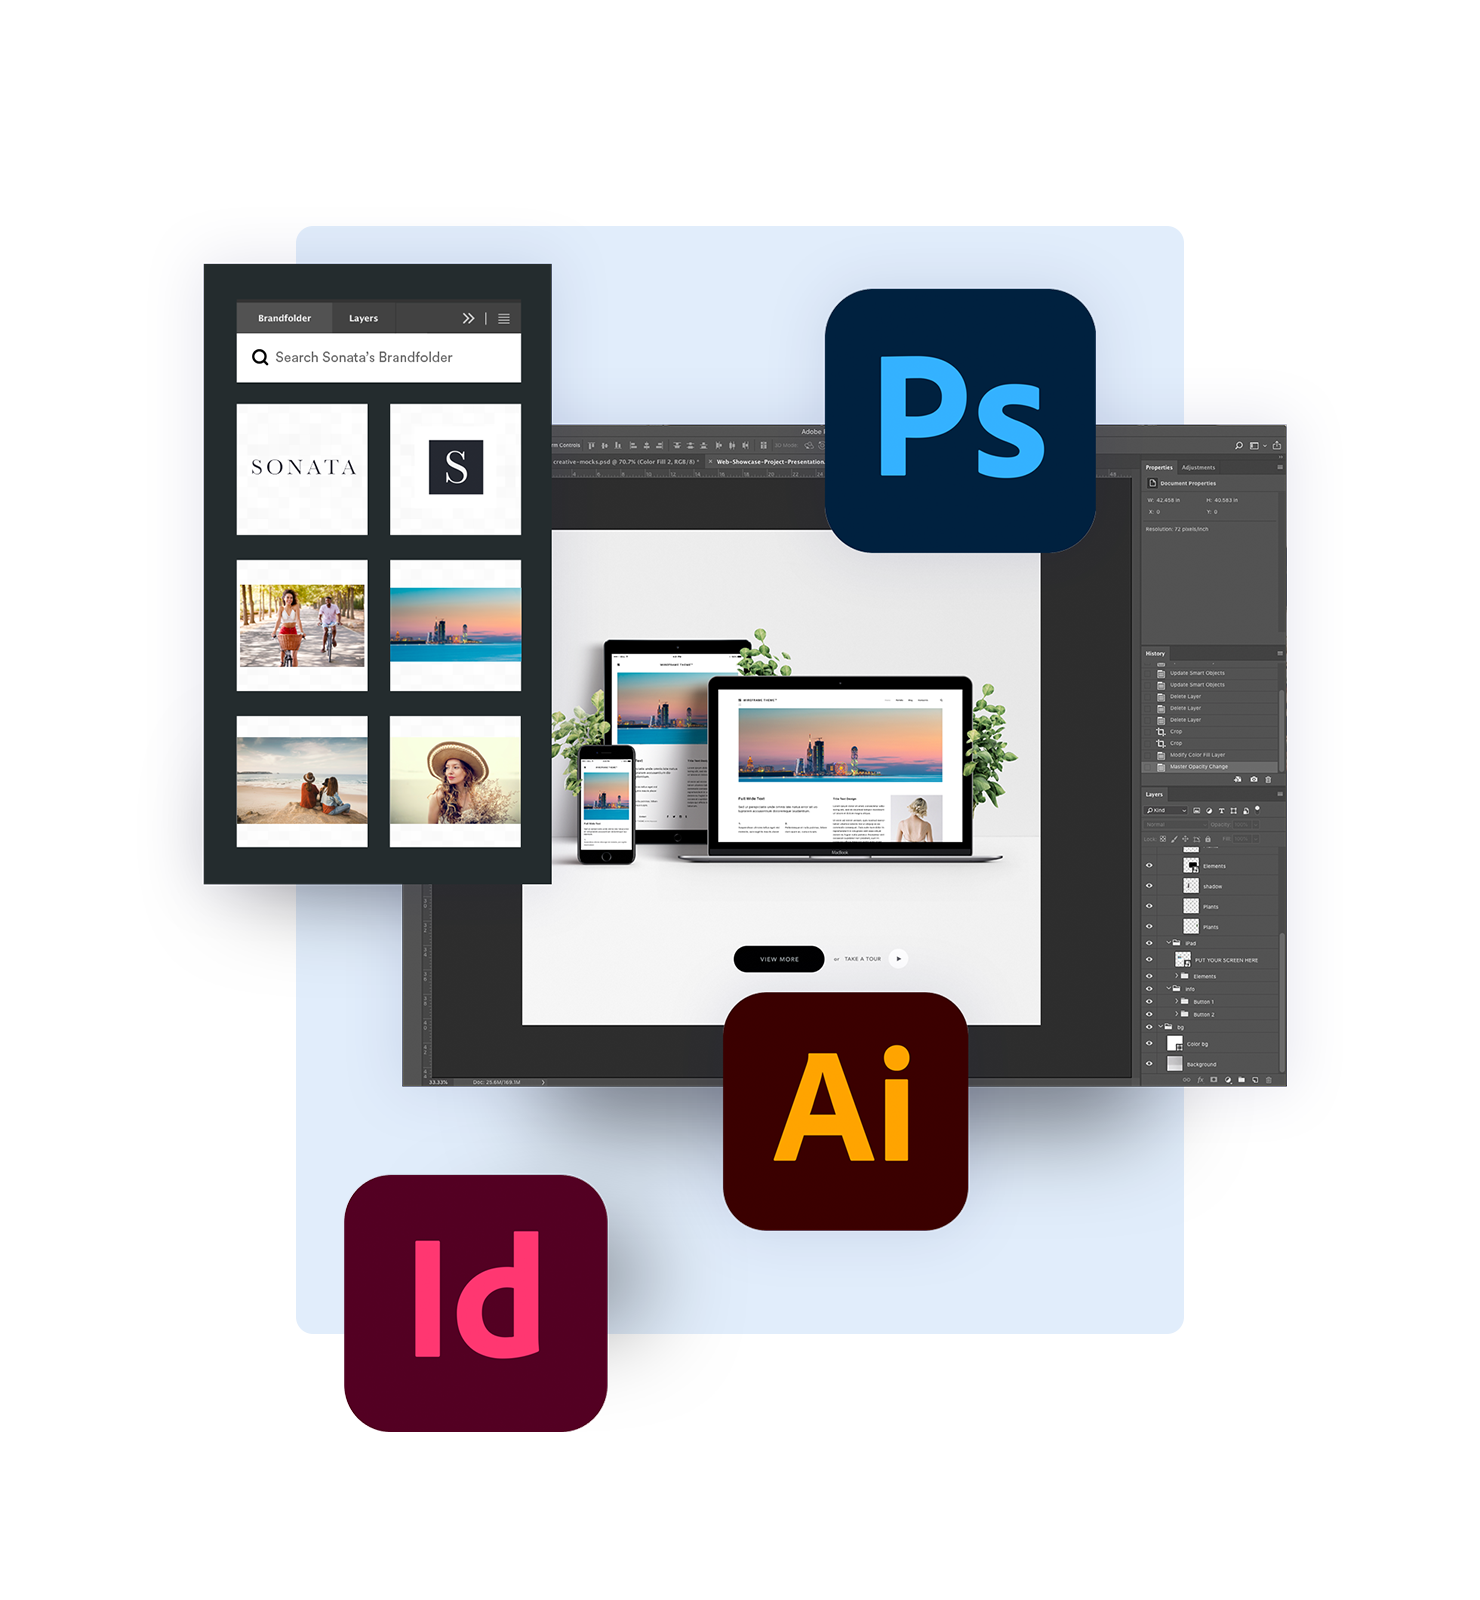 Brandfolder's integration with Adobe products